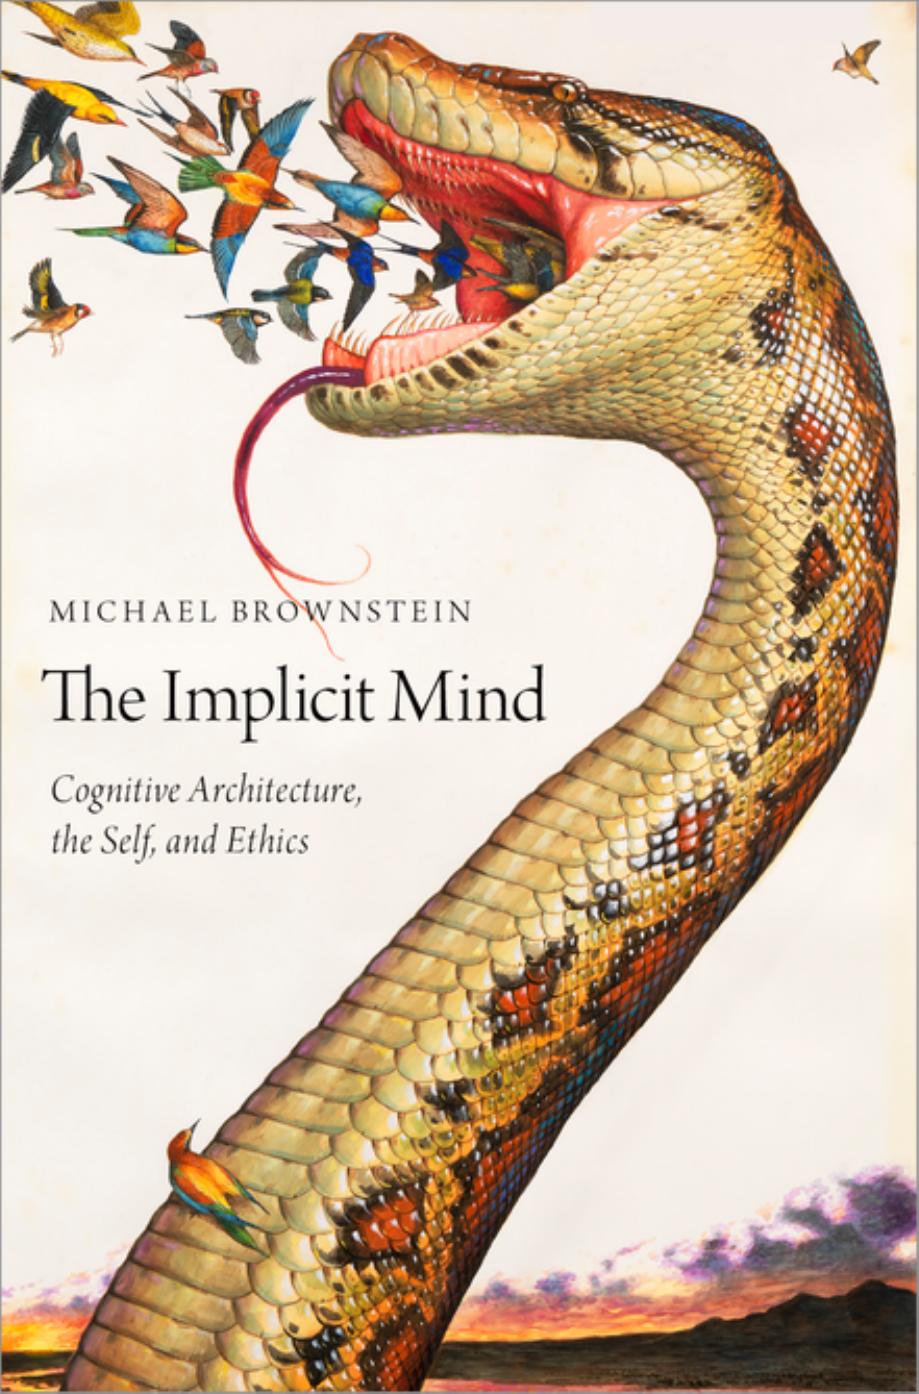 The Implicit Mind: Cognitive Architecture, the Self, and Ethics